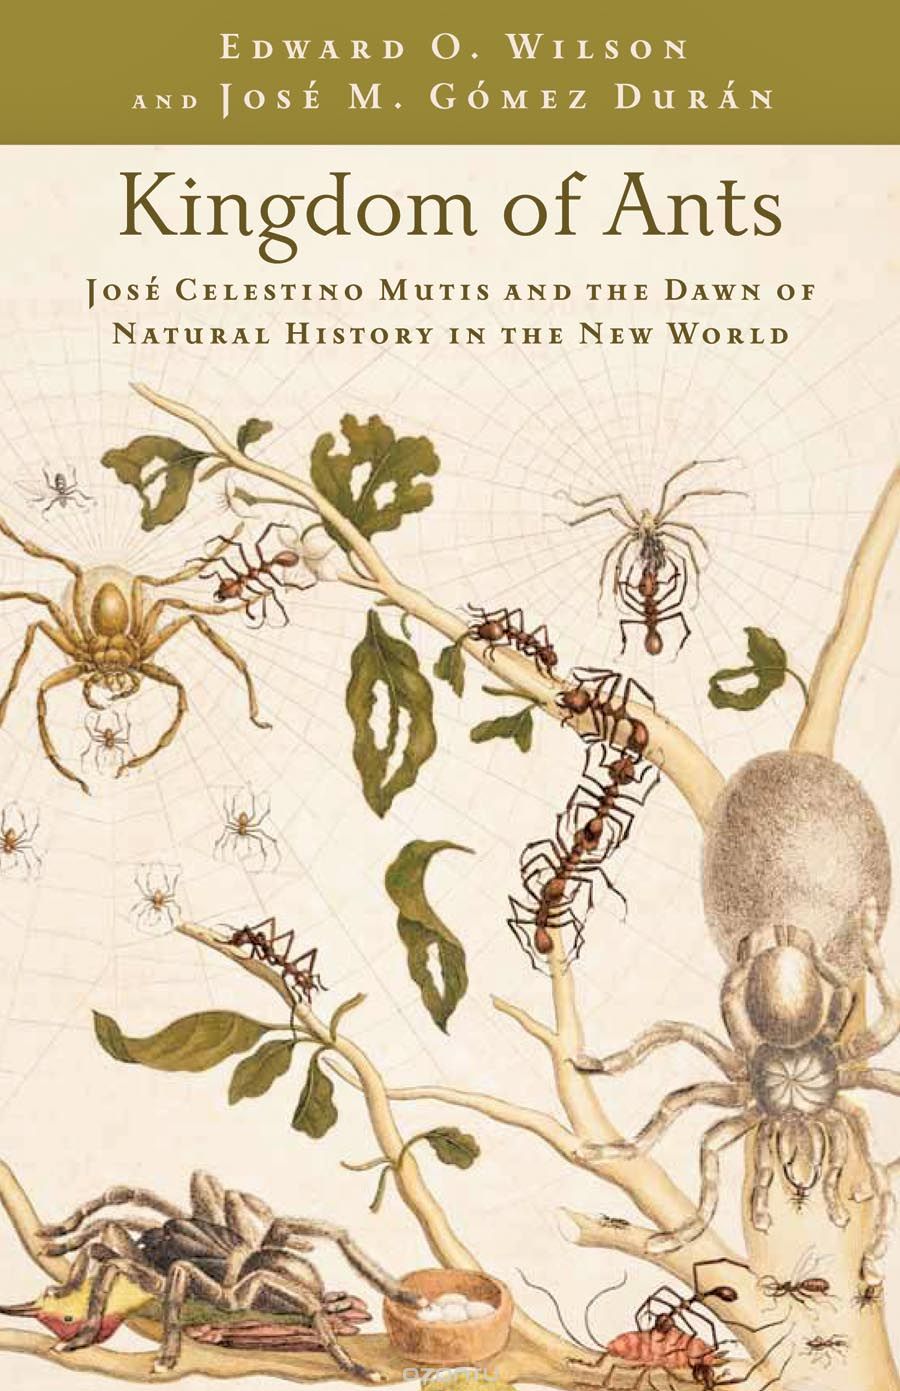 Kingdom Of Ants – Jose Celestino Mutis and the Dawn of Natural History in the New World